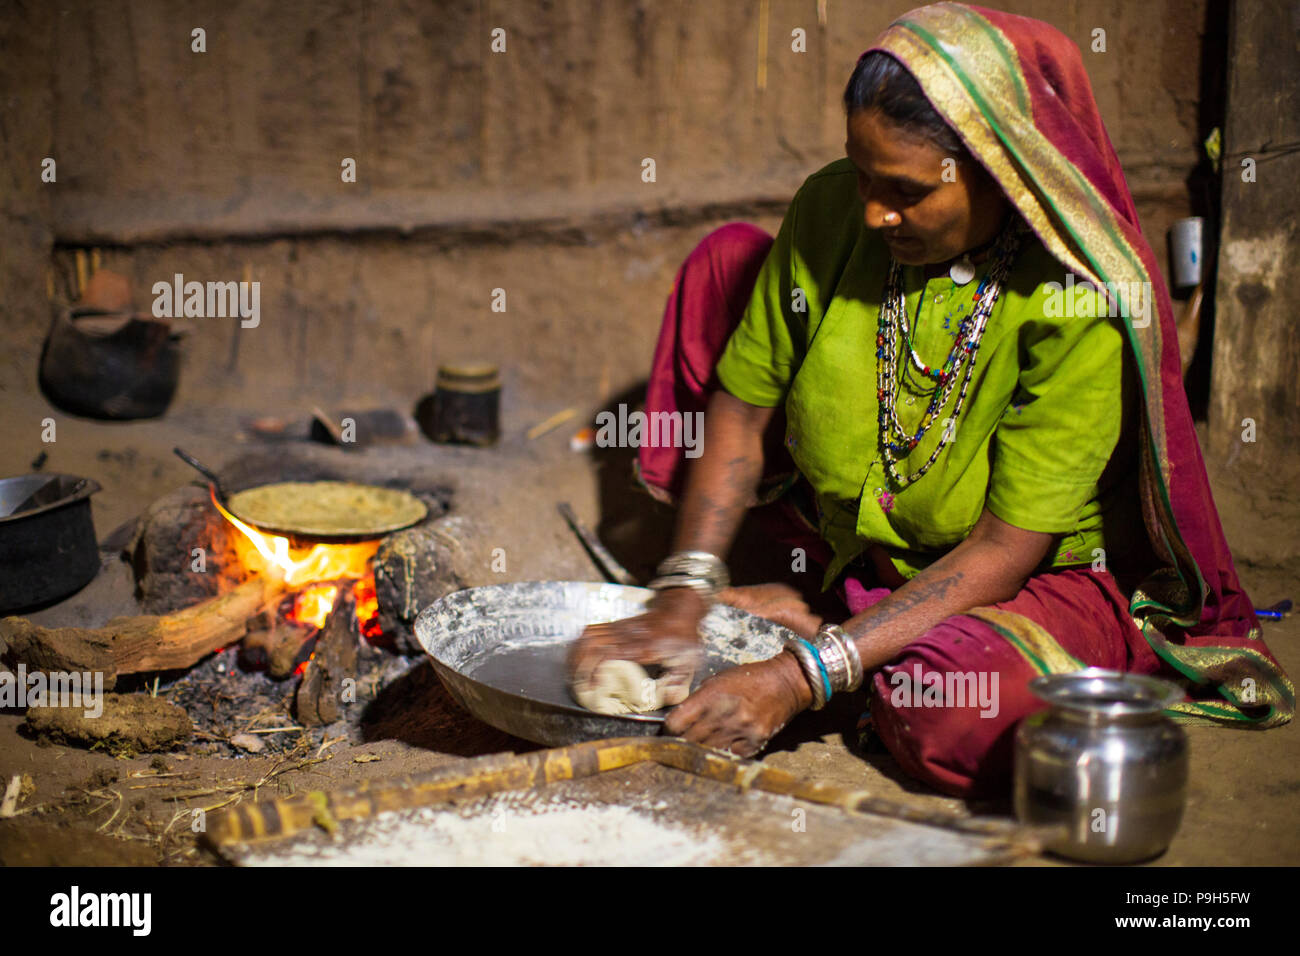 A woman making chapatis on an open fire in her kitchen, Sendhwa, India. Stock Photo